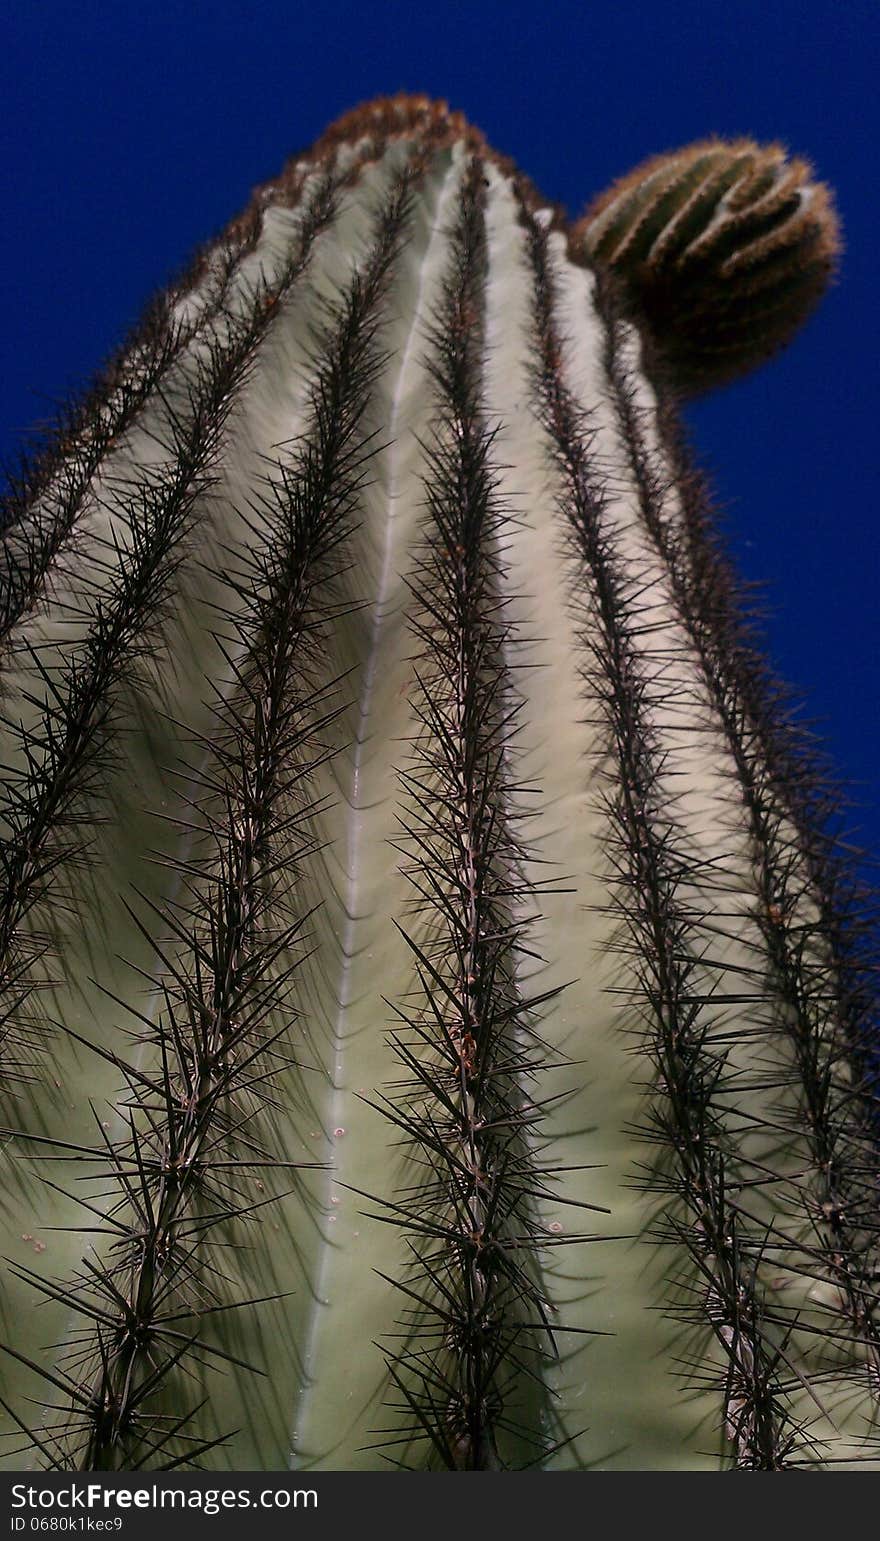 Cactus plant growing high to the sky